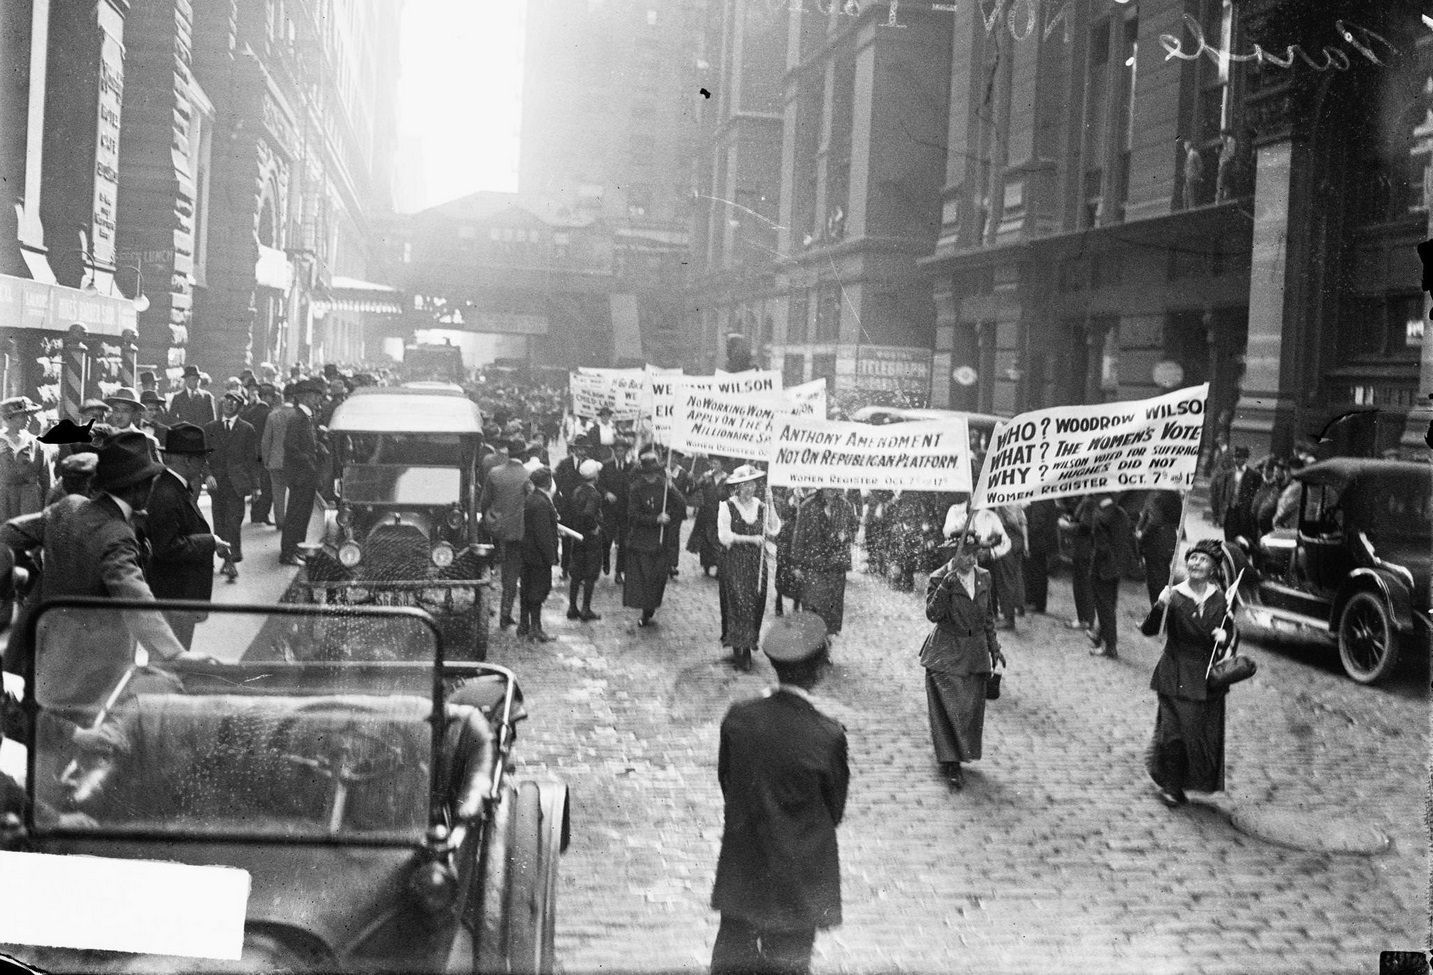 Mrs George Taylor and Mrs Catherine Waugh McCulloch leading the Democratic women's parade on LaSalle Street in the Loop community area, Chicago, Illinois, October 5, 1916.